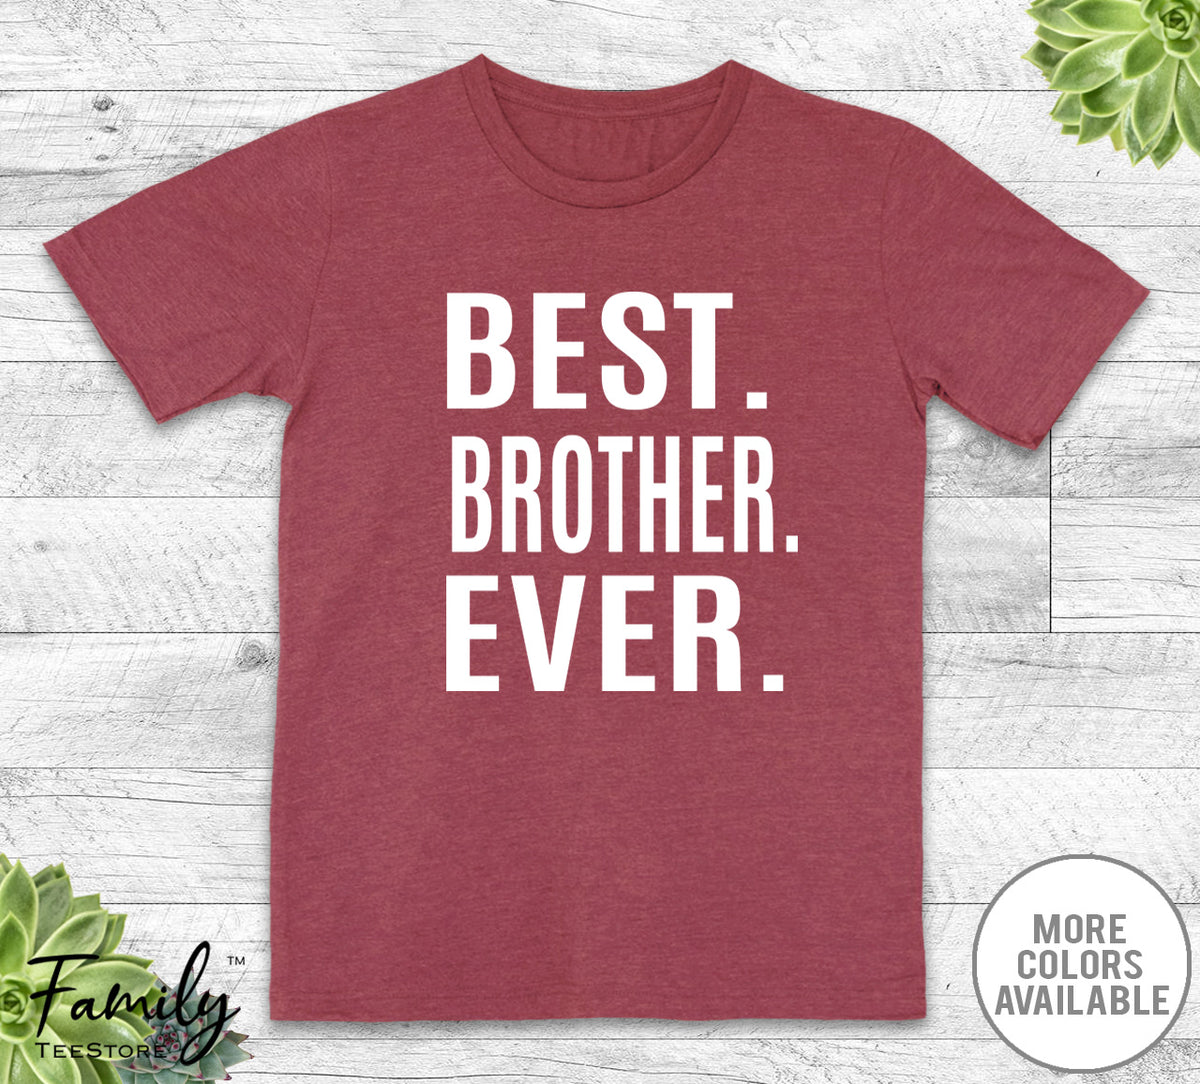 Best Brother Ever - Unisex T-shirt - Brother Shirt - Brother Gift - familyteeprints